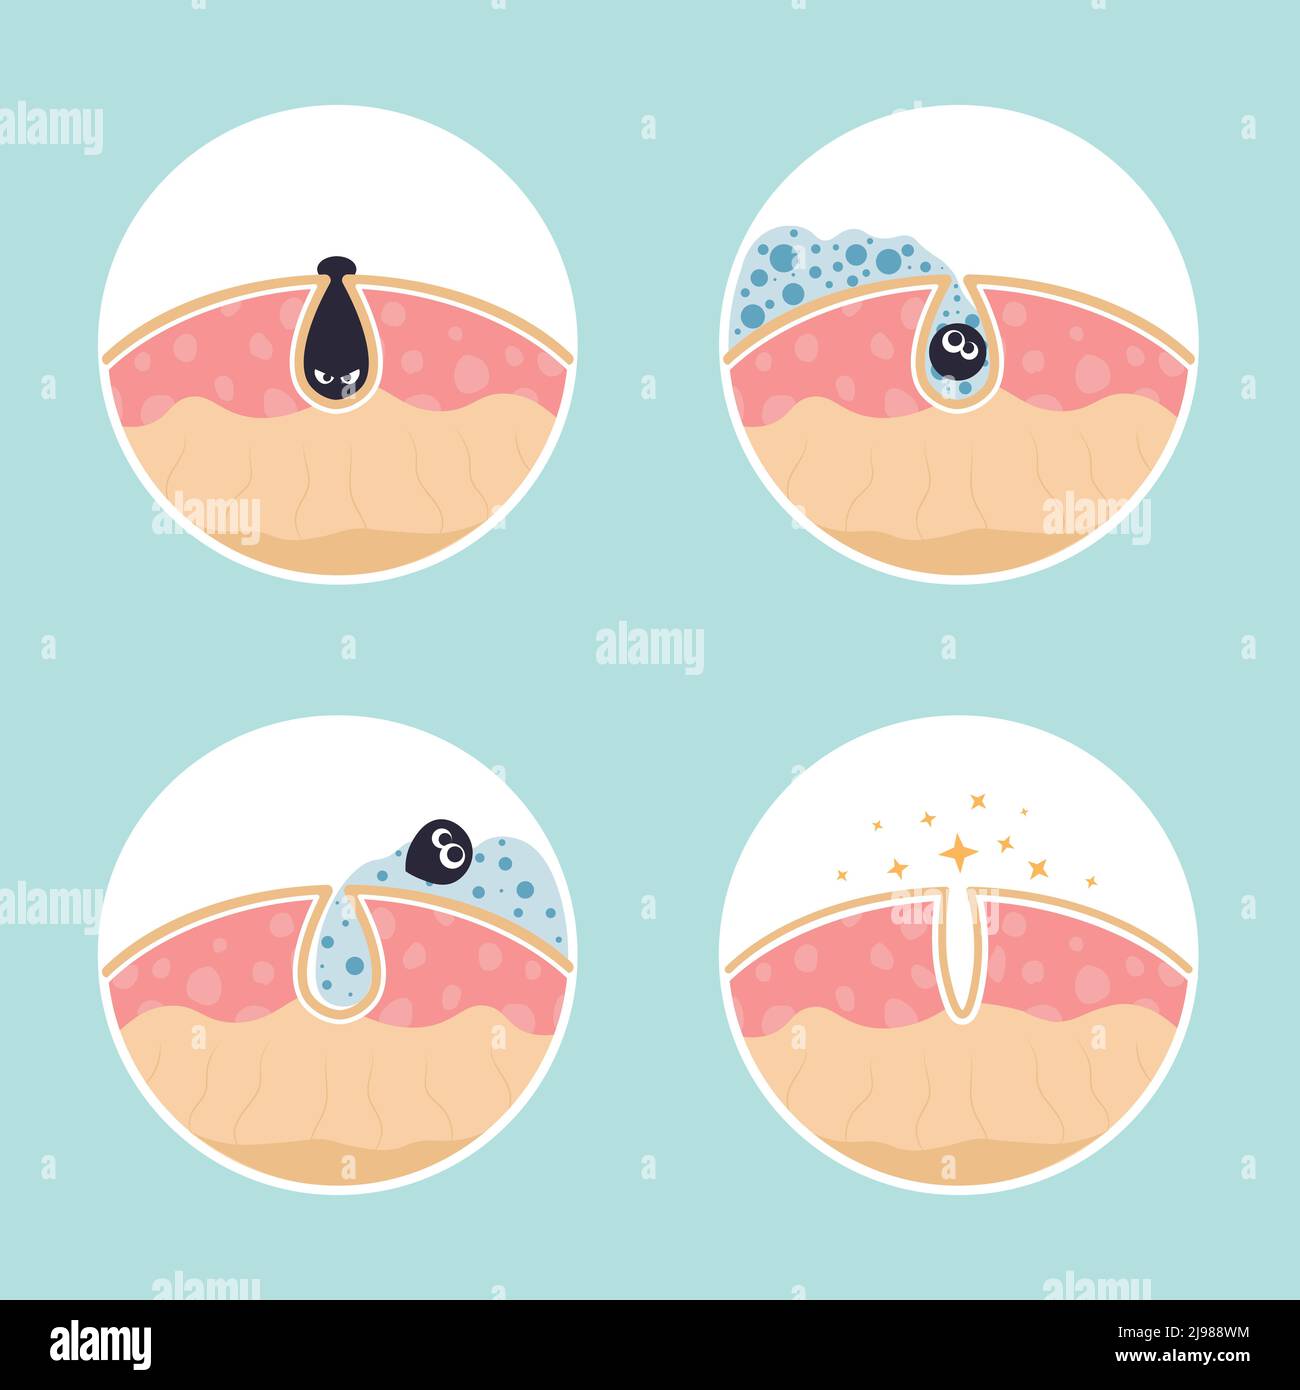 Cleaning clogged pores process flat vector illustration. Steps of blackheads, sebum or pimples removal, skin cleaning foam, skin care. Teenager skin. Shrinking and minimizing face pores concept. Stock Vector